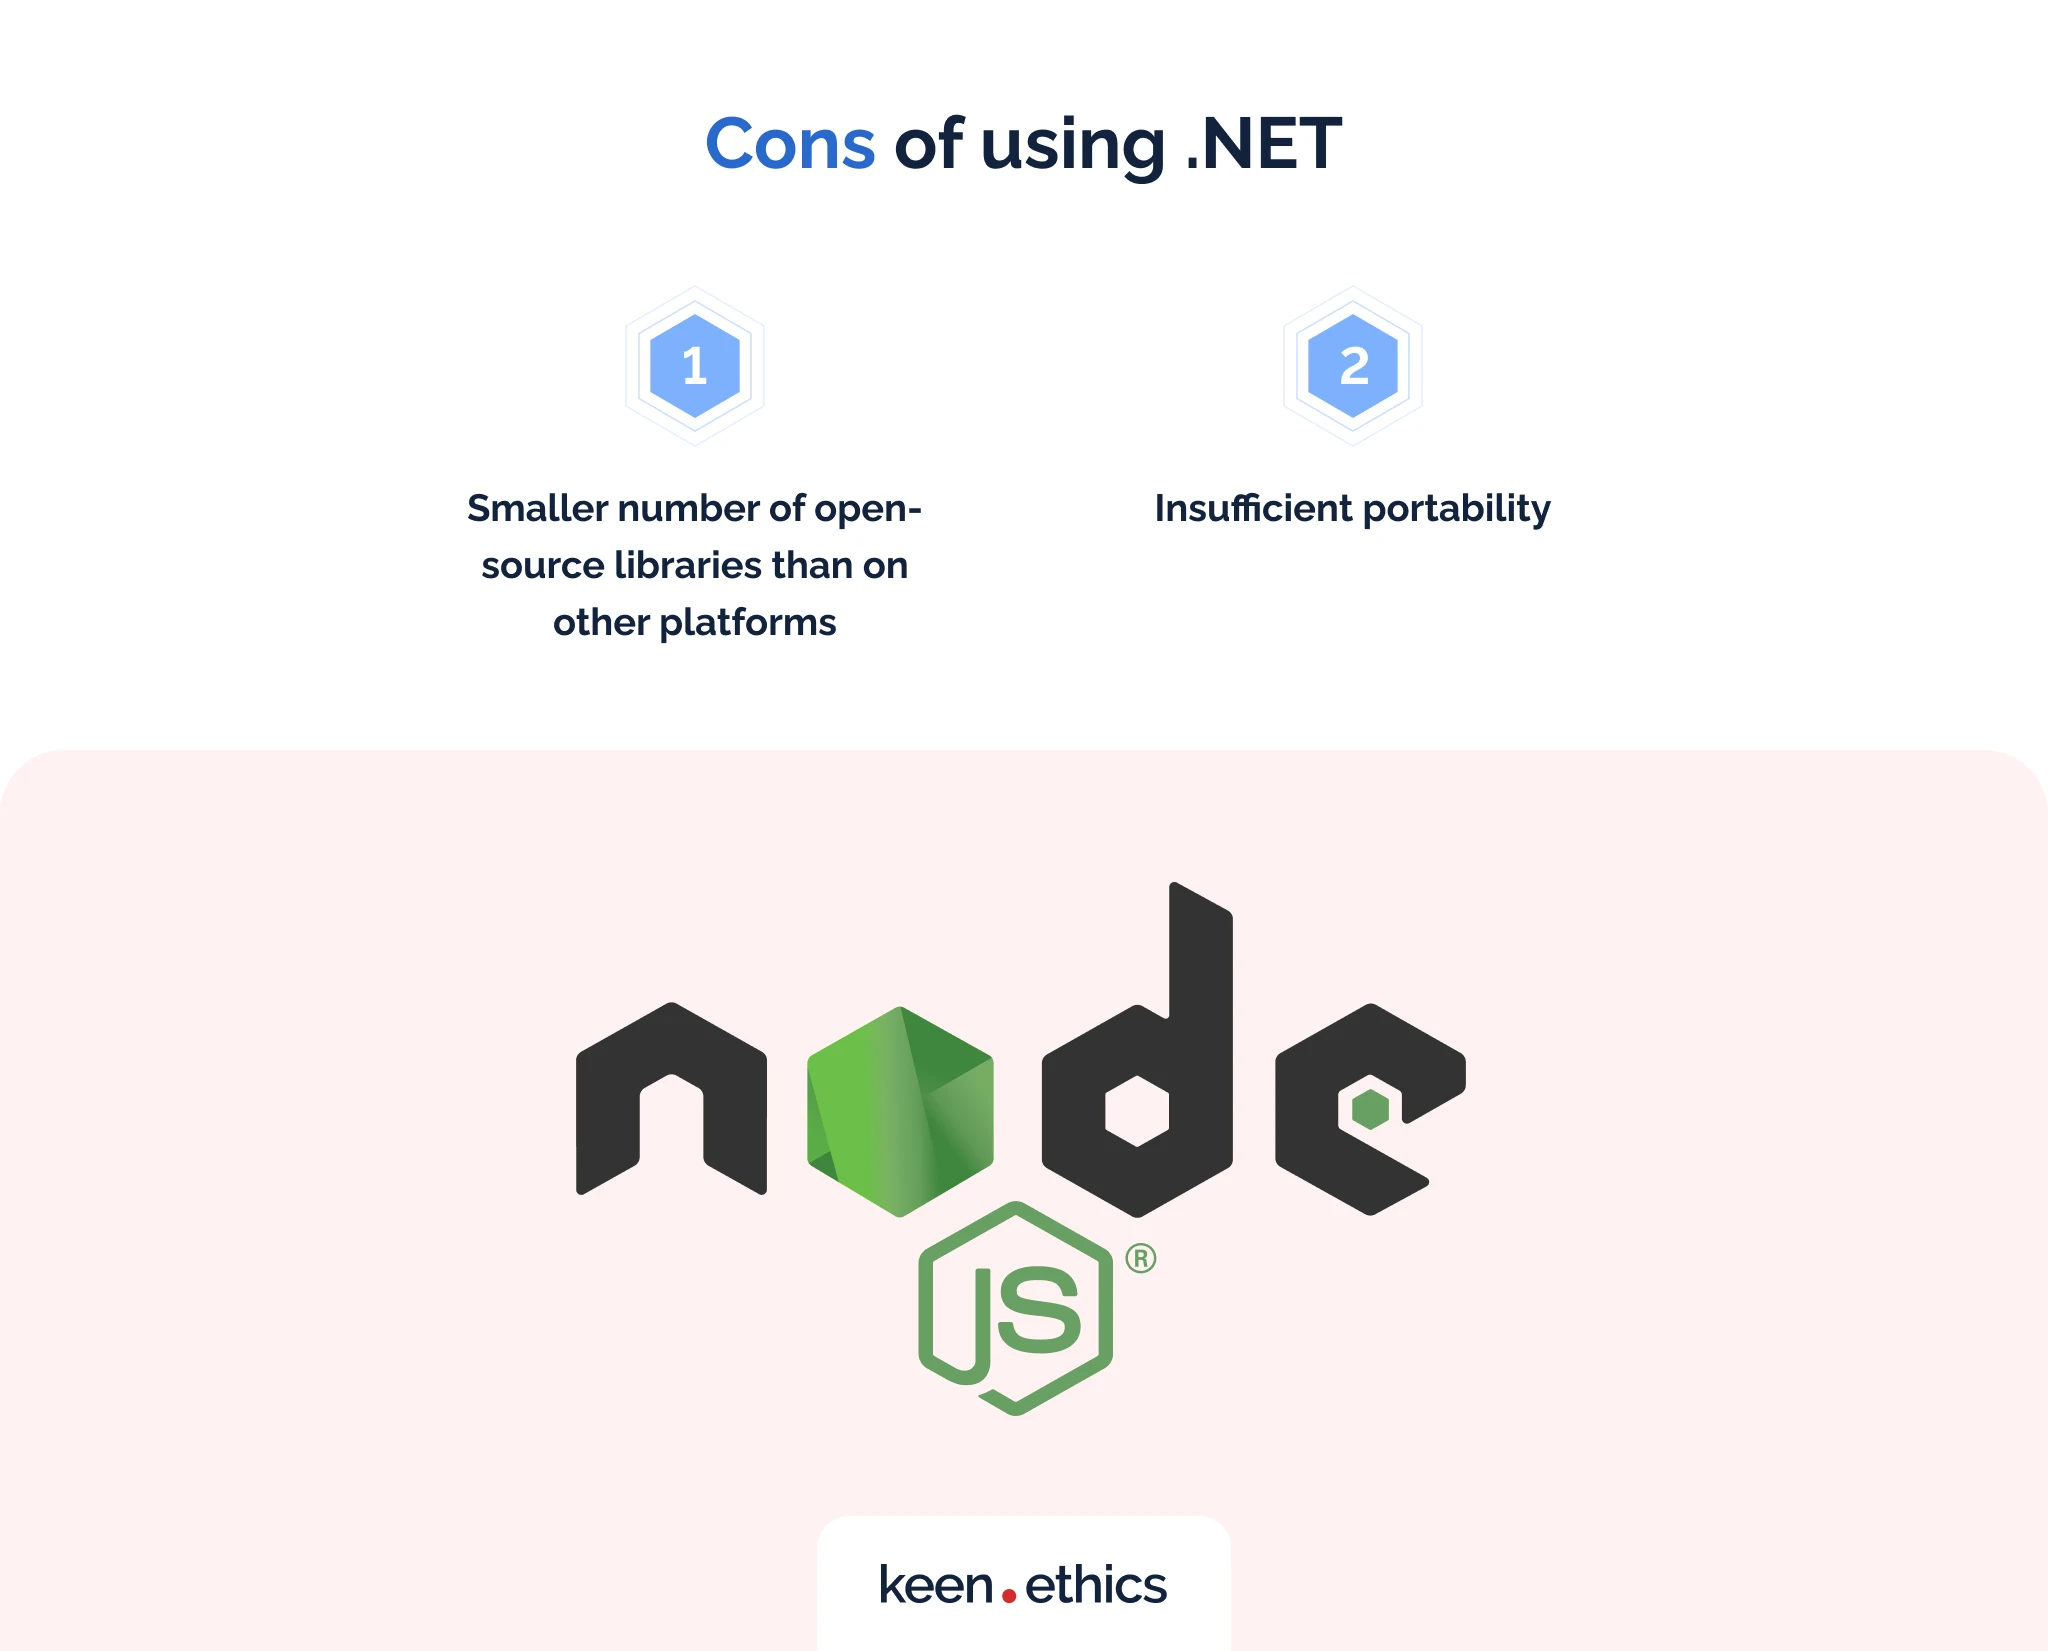 Cons of using .NET